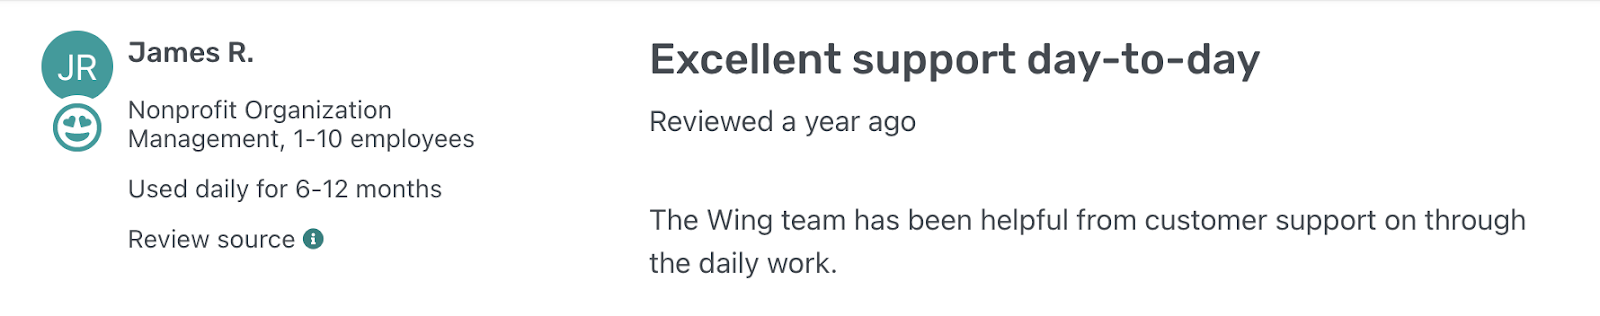 virtual assistant service called Wing Assistant review